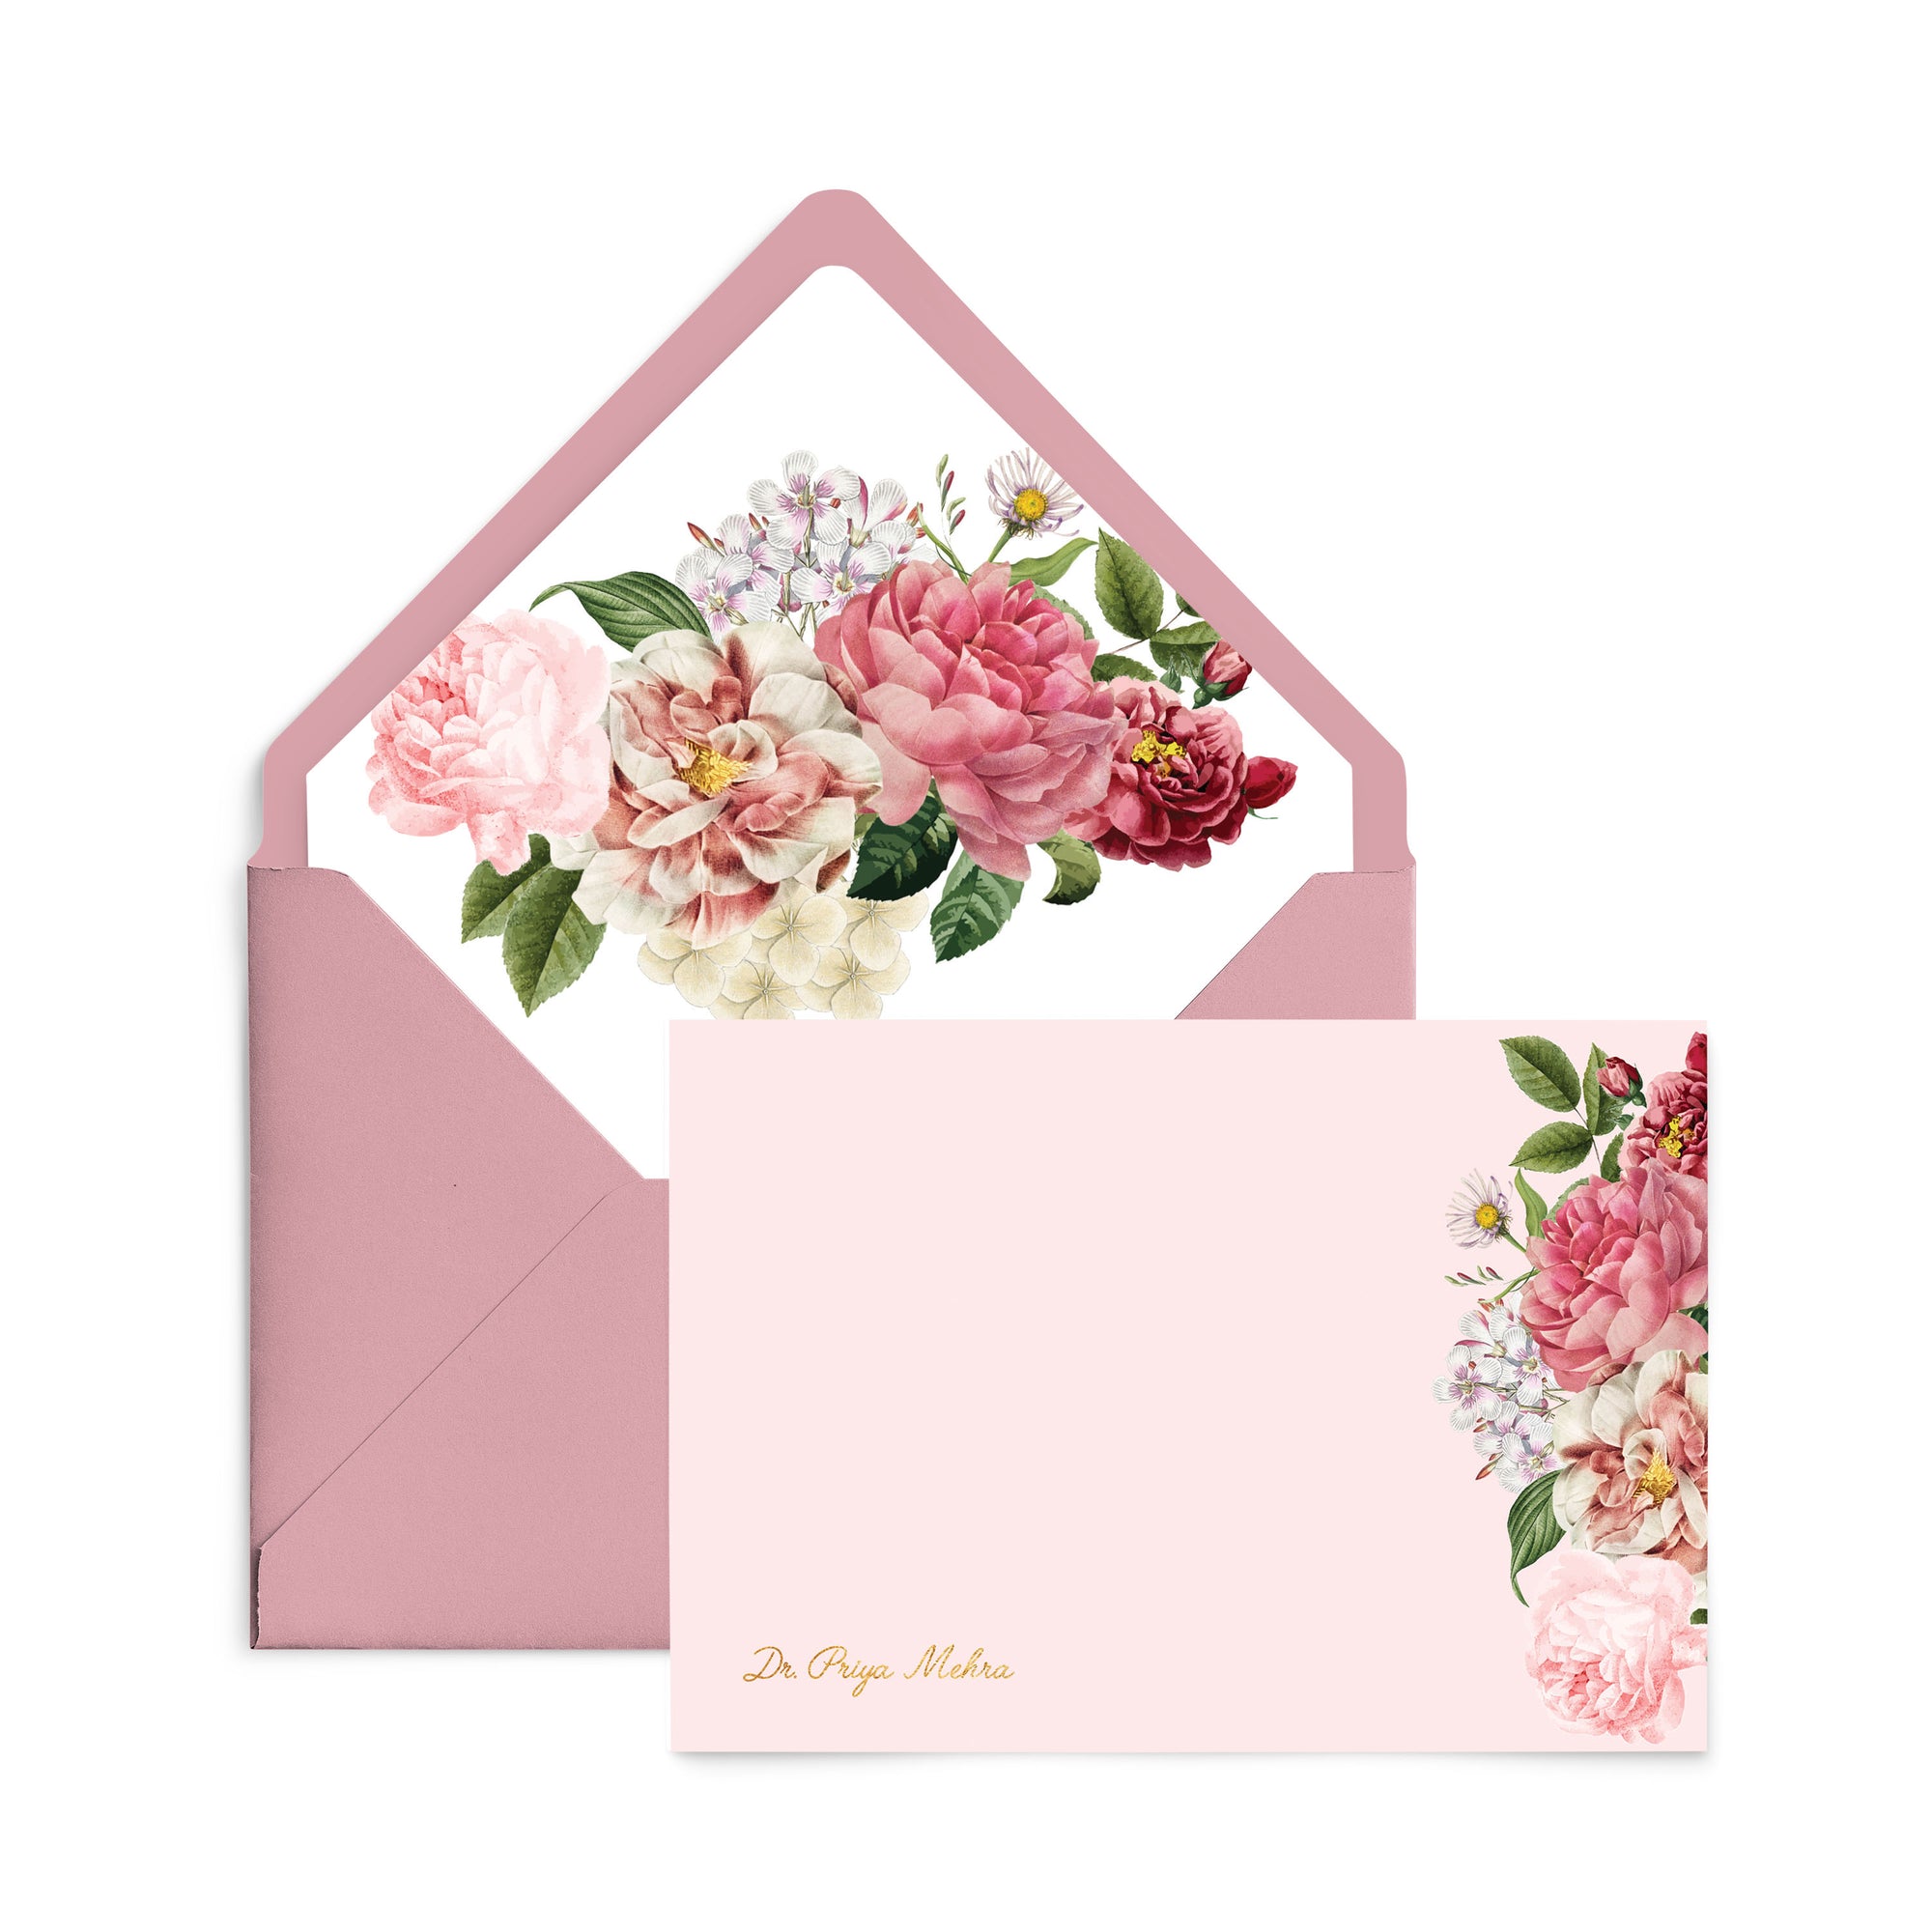 birthday cards, notecard sets with envelopes, personalized stationery, buy personalized notecards online, wedding invite, thank you card, 